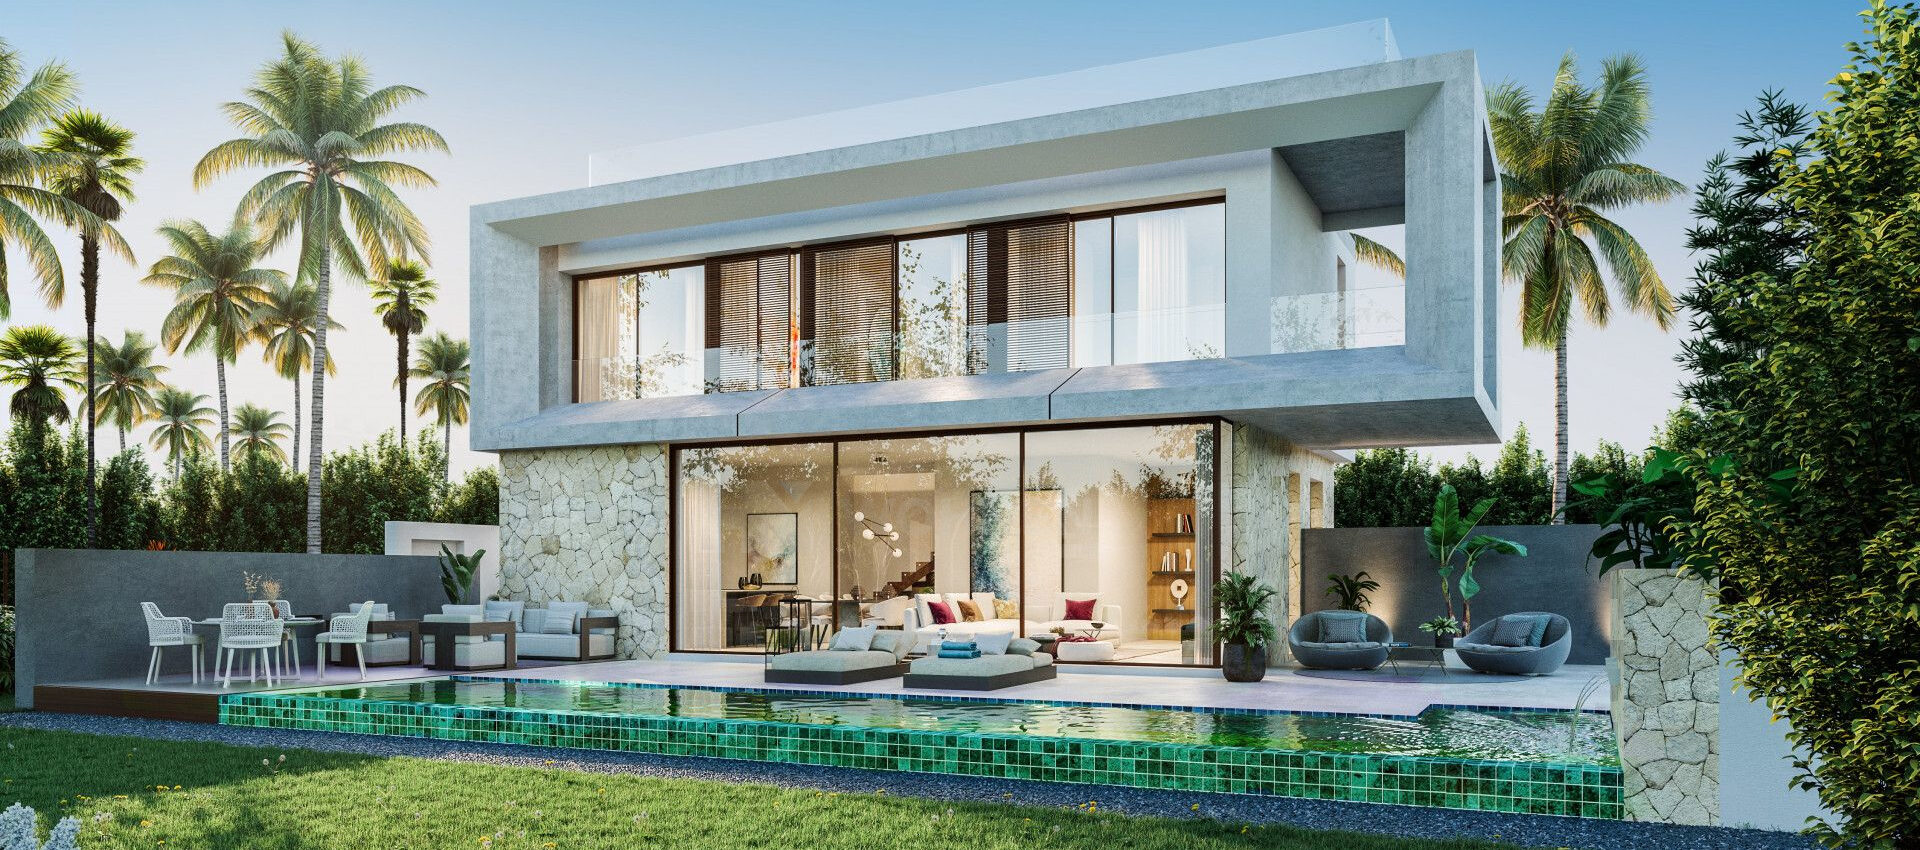 Fabulous luxury villa project in one of the most prestigious residential areas of Marbella